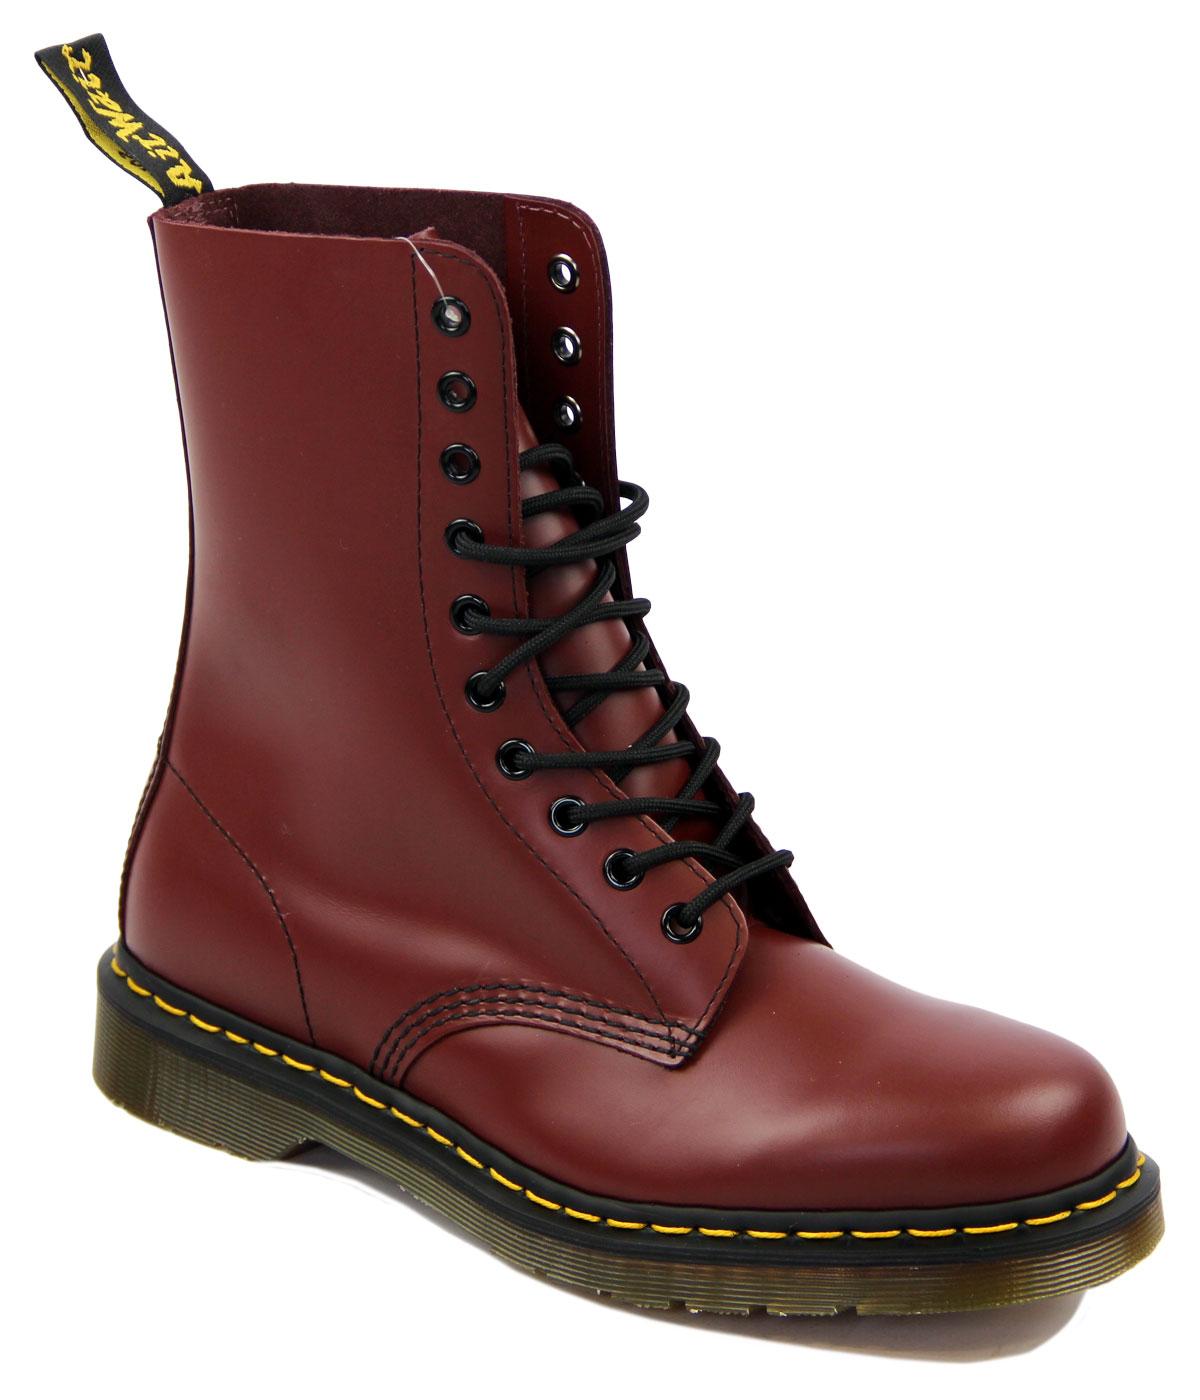 Dr Martens 1490 Retro 60's Classic Cherry Red 10 Eyelet Boots